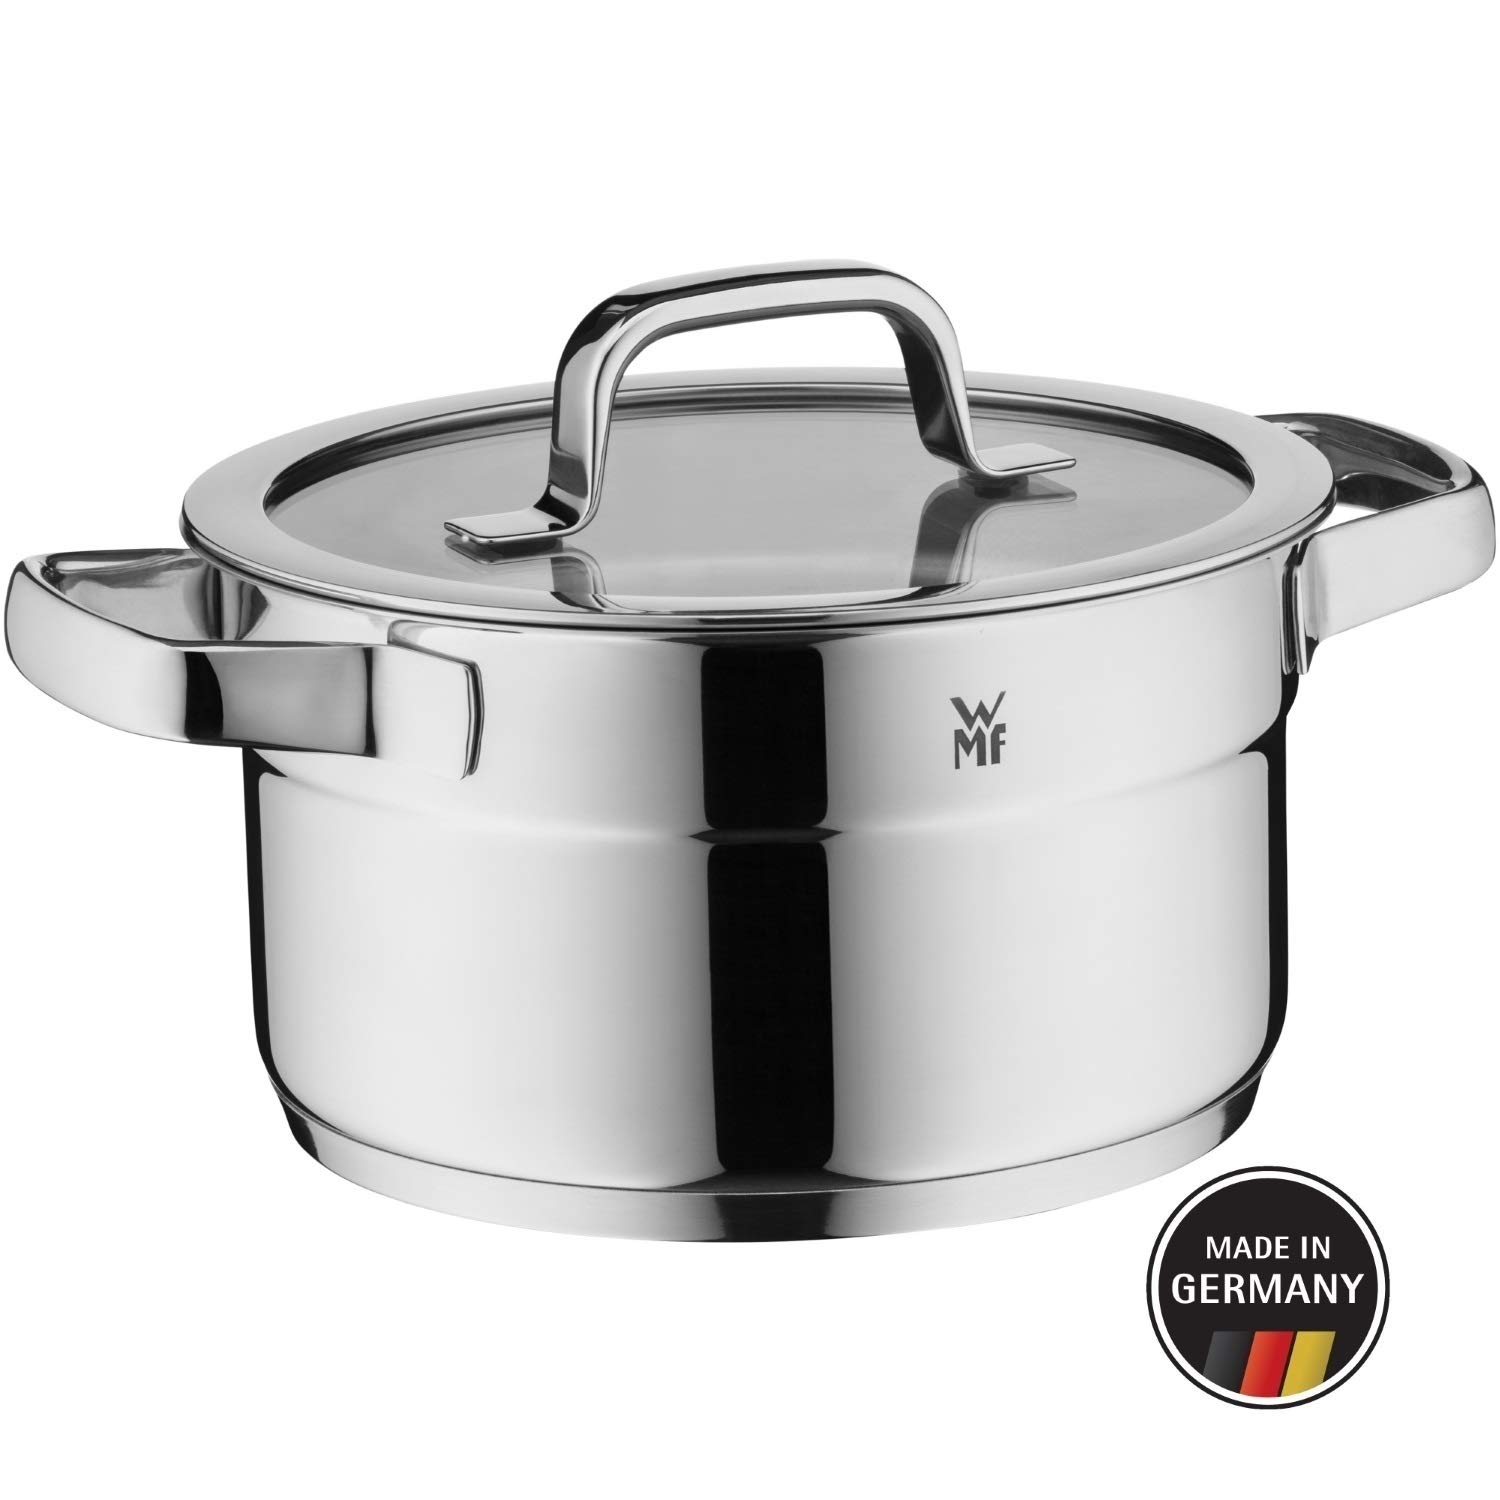 Wmf Compact Cuisine Cooking Pot 20 Cm With Glass Lid, Meat Pot, 3.3 L, Crom